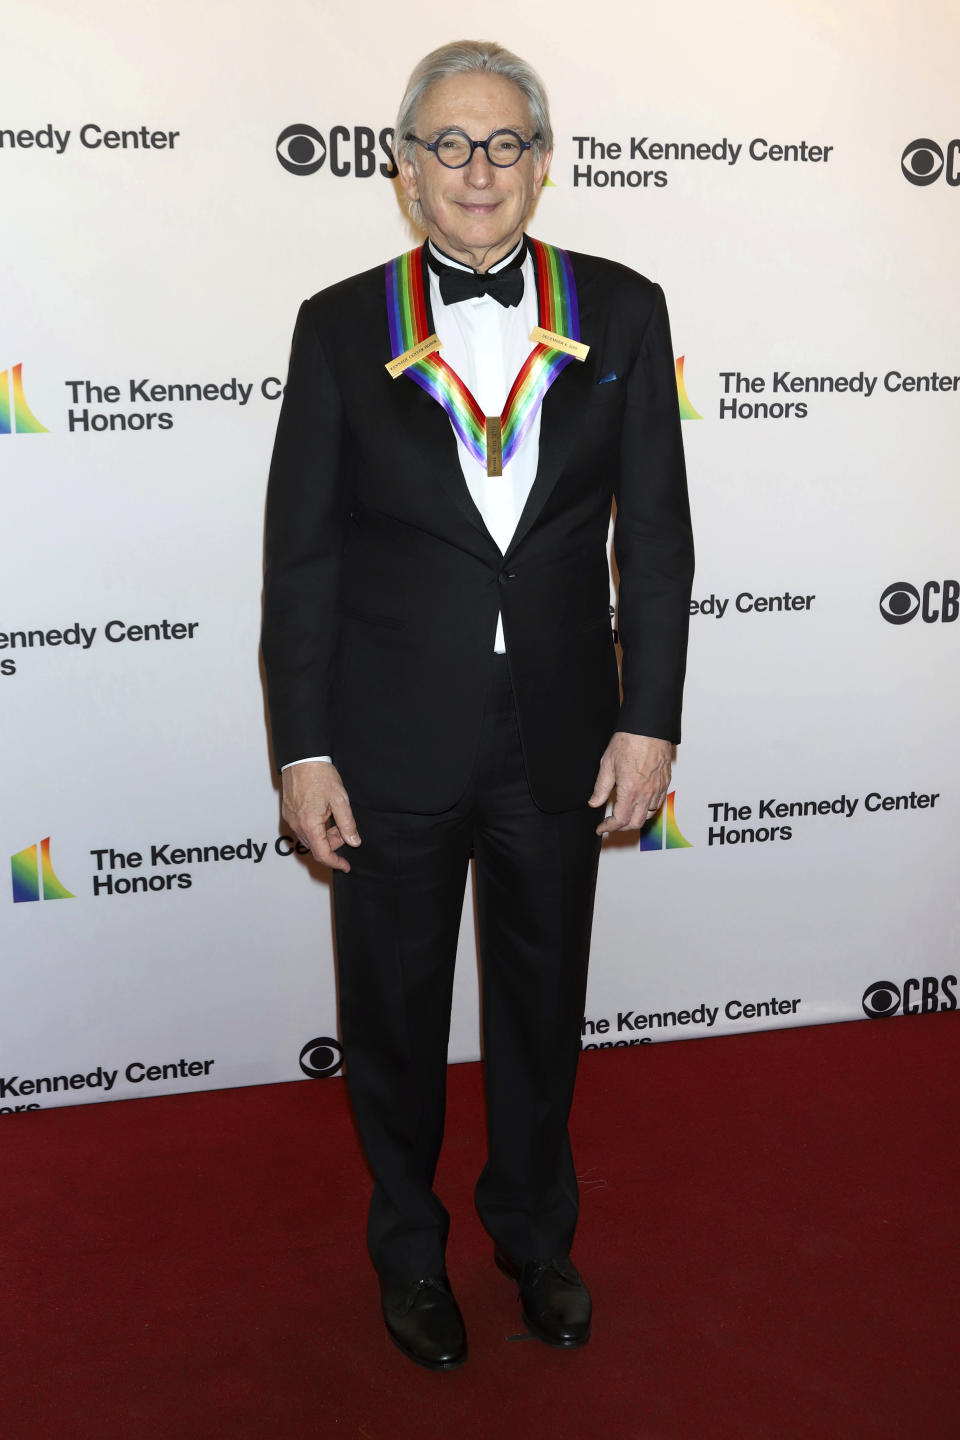 2019 Kennedy Center honoree Michael Tilson Thomas attends the 42nd Annual Kennedy Center Honors at The Kennedy Center, Sunday, Dec. 8, 2019, in Washington. (Photo by Greg Allen/Invision/AP)